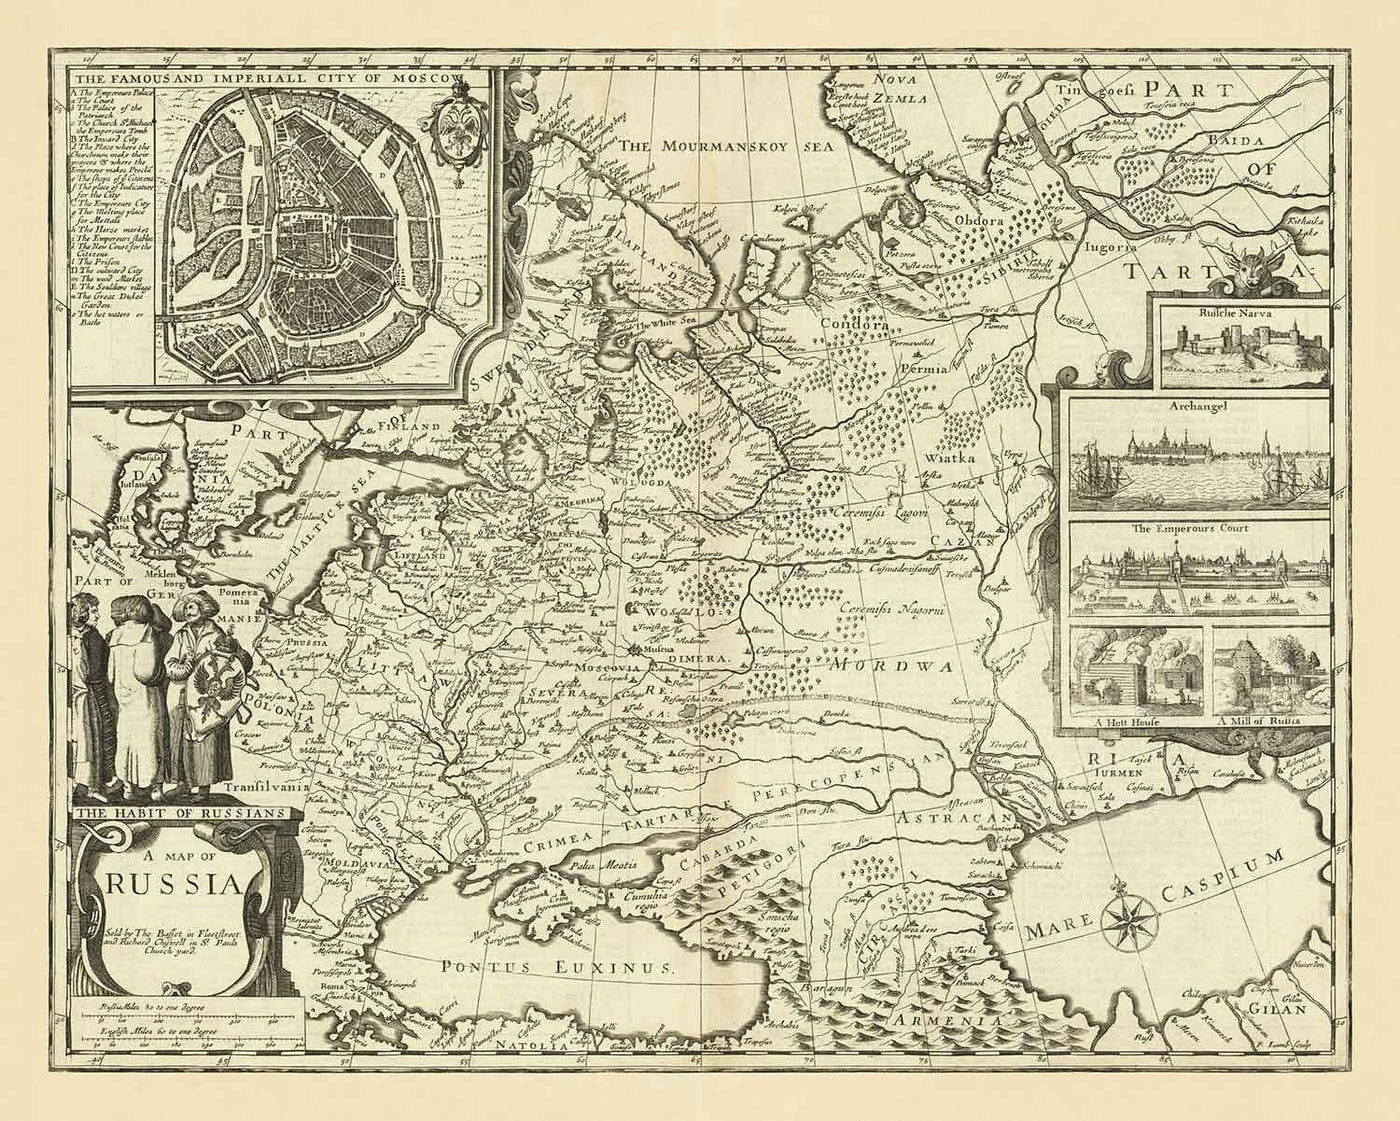 Old Map of Russia, 1676 by John Speed - Peter the Great's Russian Empire, Old Europe, Moscow, Kiev, Tatars, Ukraine